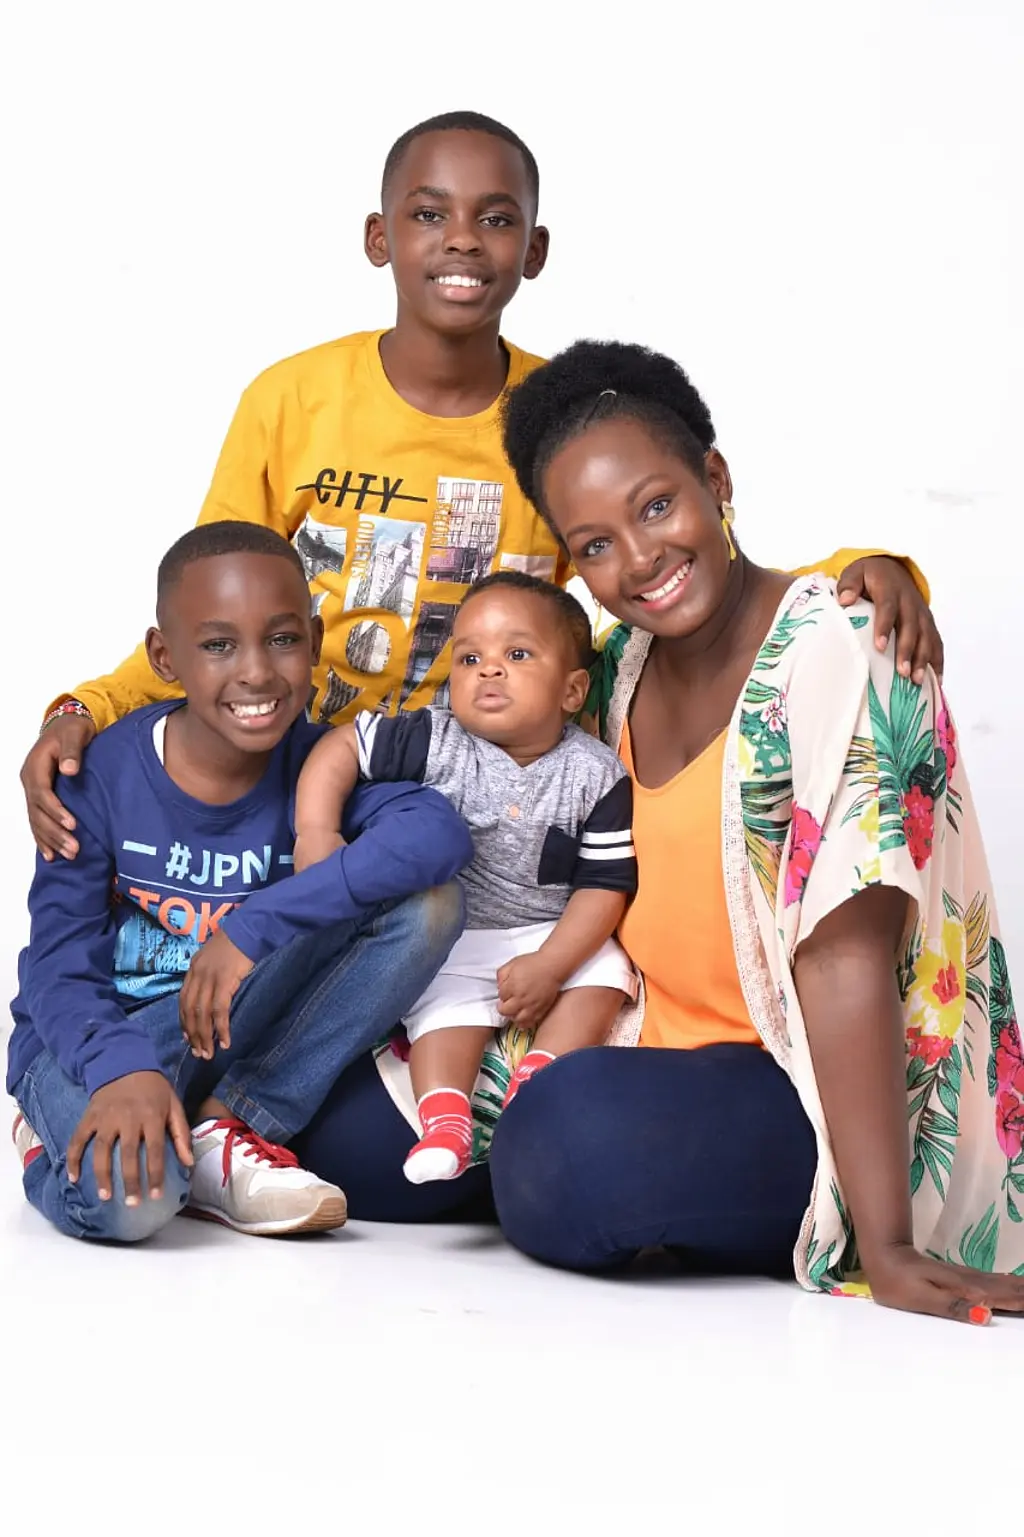 Mary Shompole, an RTI staff member based in Kenya, and her sons